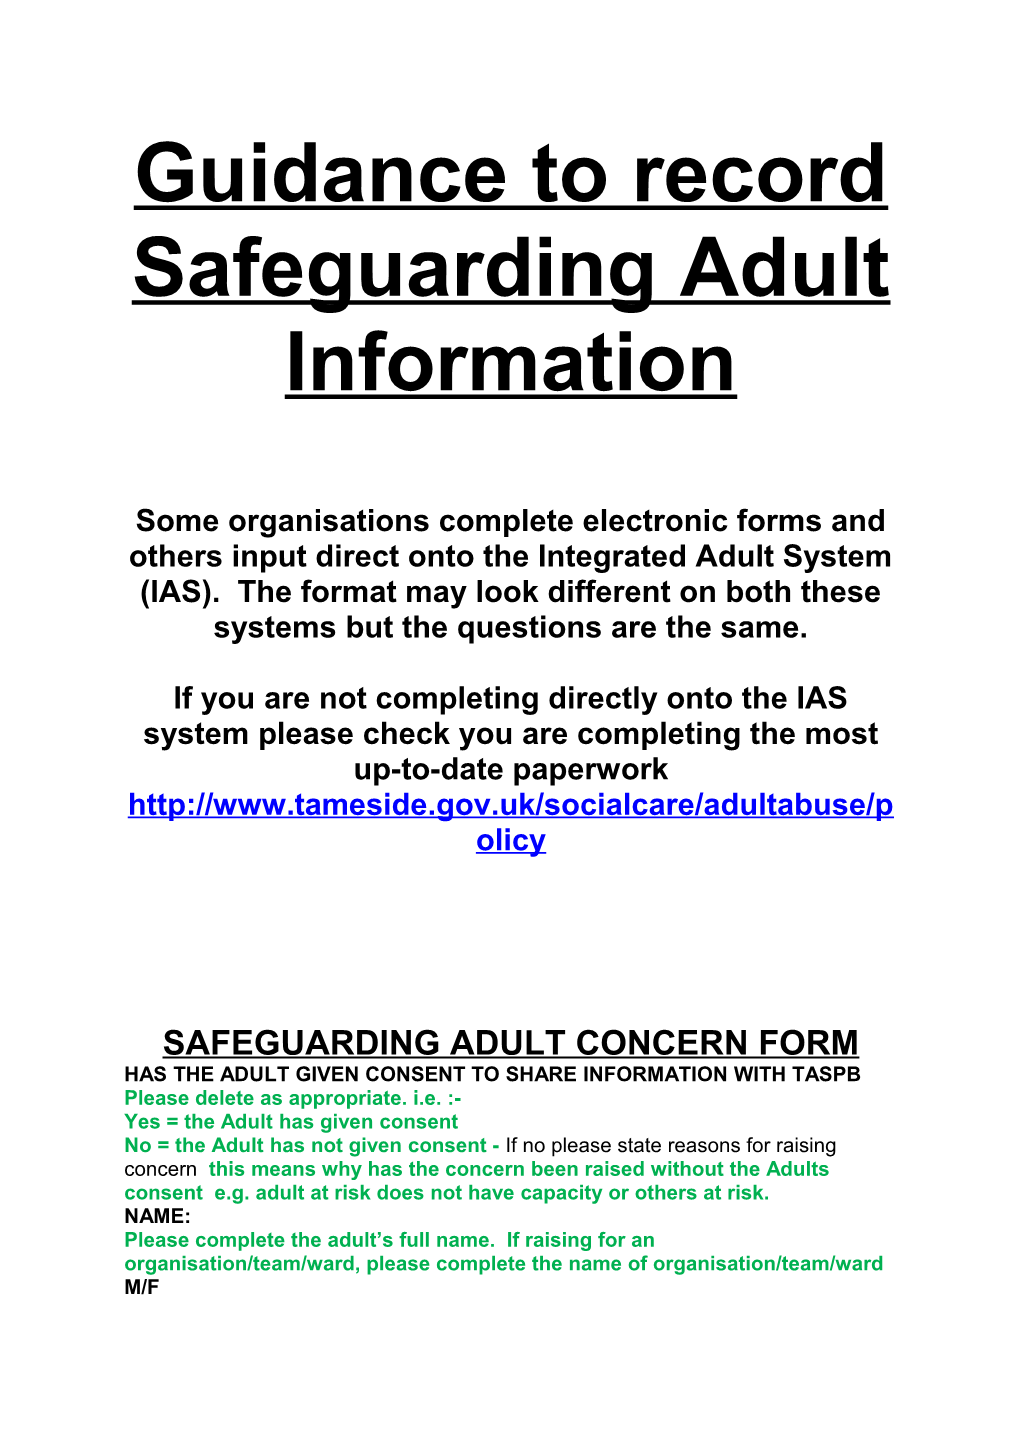 Guidance to Record Safeguarding Adult Information